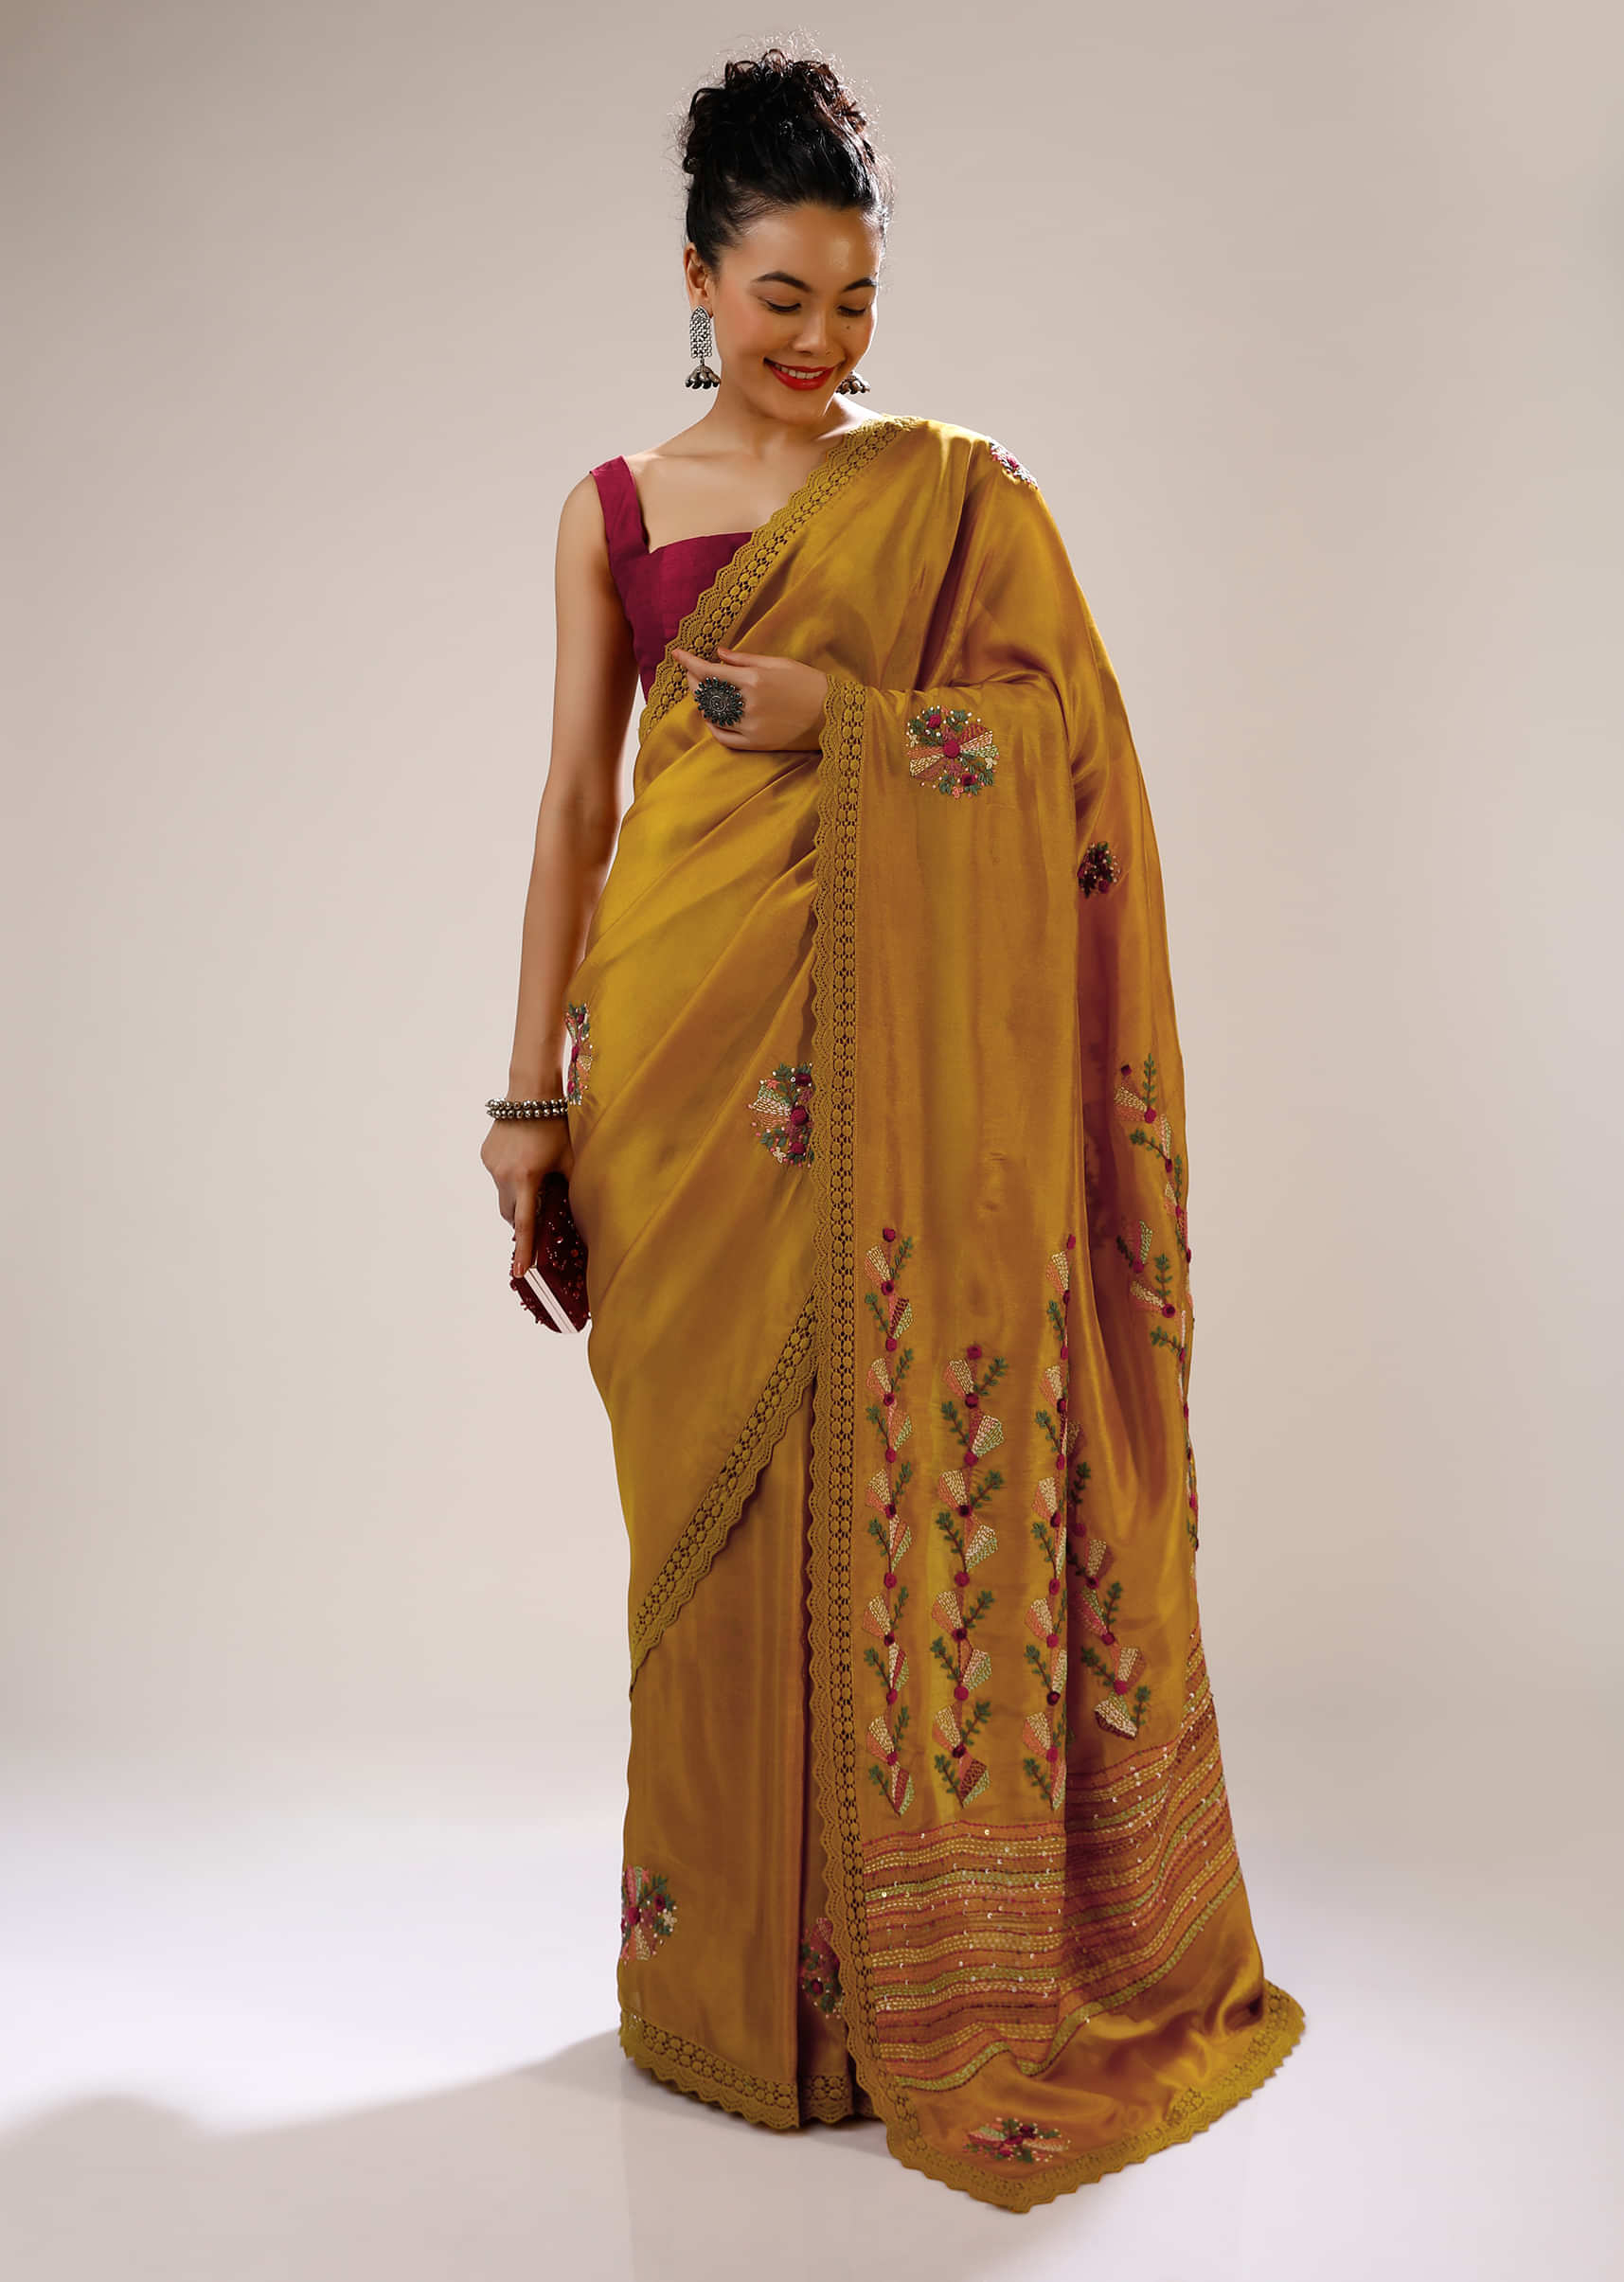 Mustard Saree In Silk With Multicolored Bud Hand Embroidery In Floral Motifs And Running Stich Design  